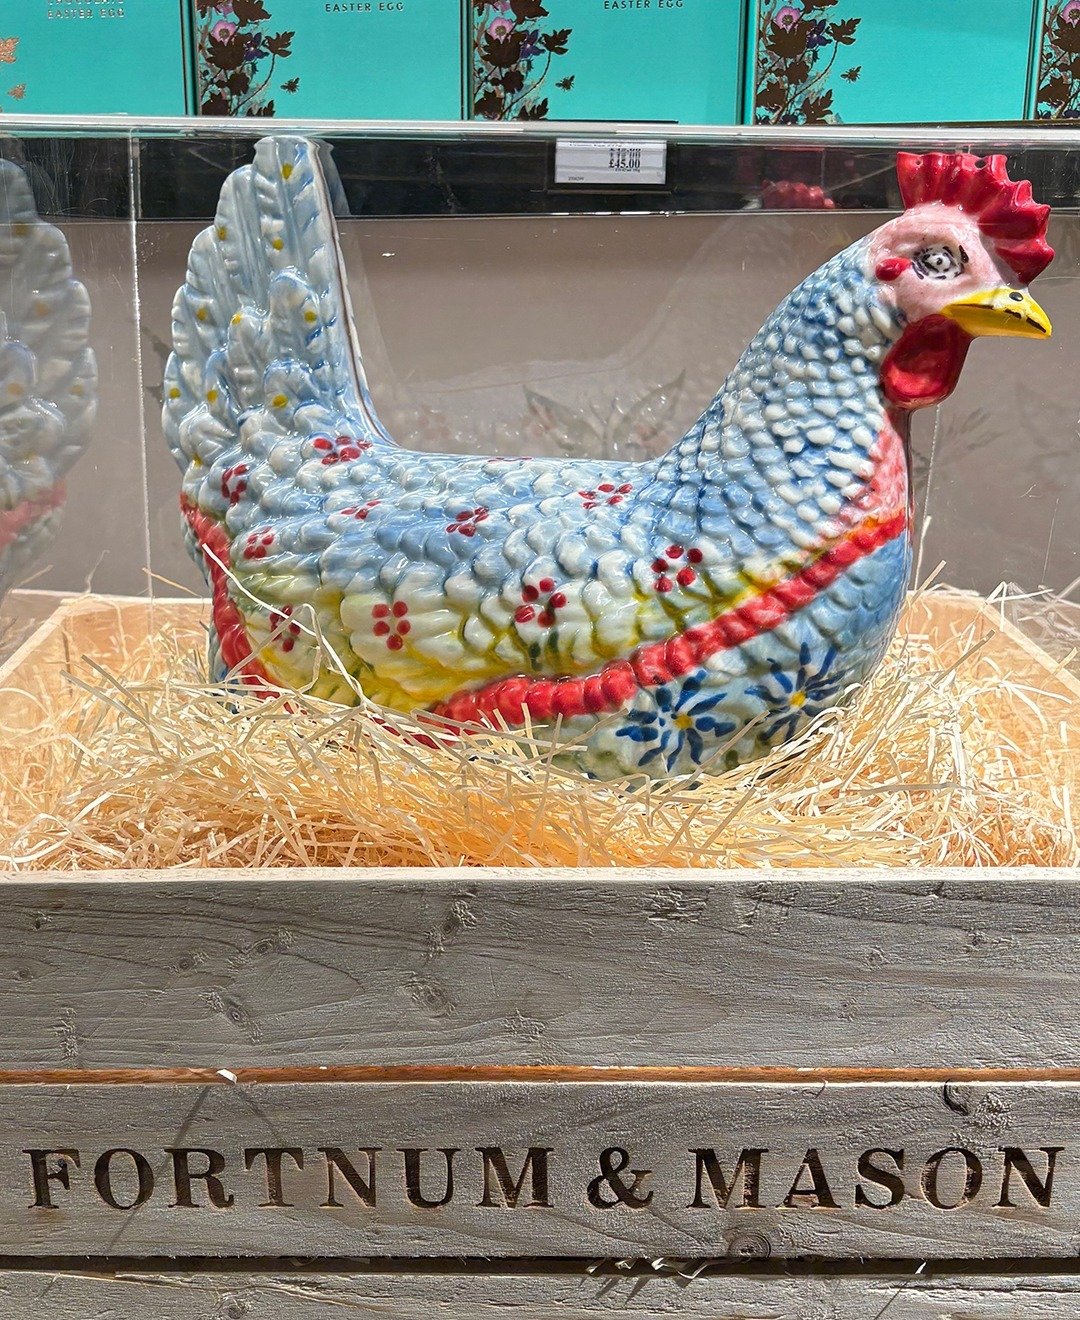 &quot;Easter is the only time it's safe to put all of your eggs in one basket!&quot;
&bull;
Easter in London is always a big, bright celebration! We spotted this wonderfully large and proud chocolate hen in @fortnums and smiled- what a wonderful thin